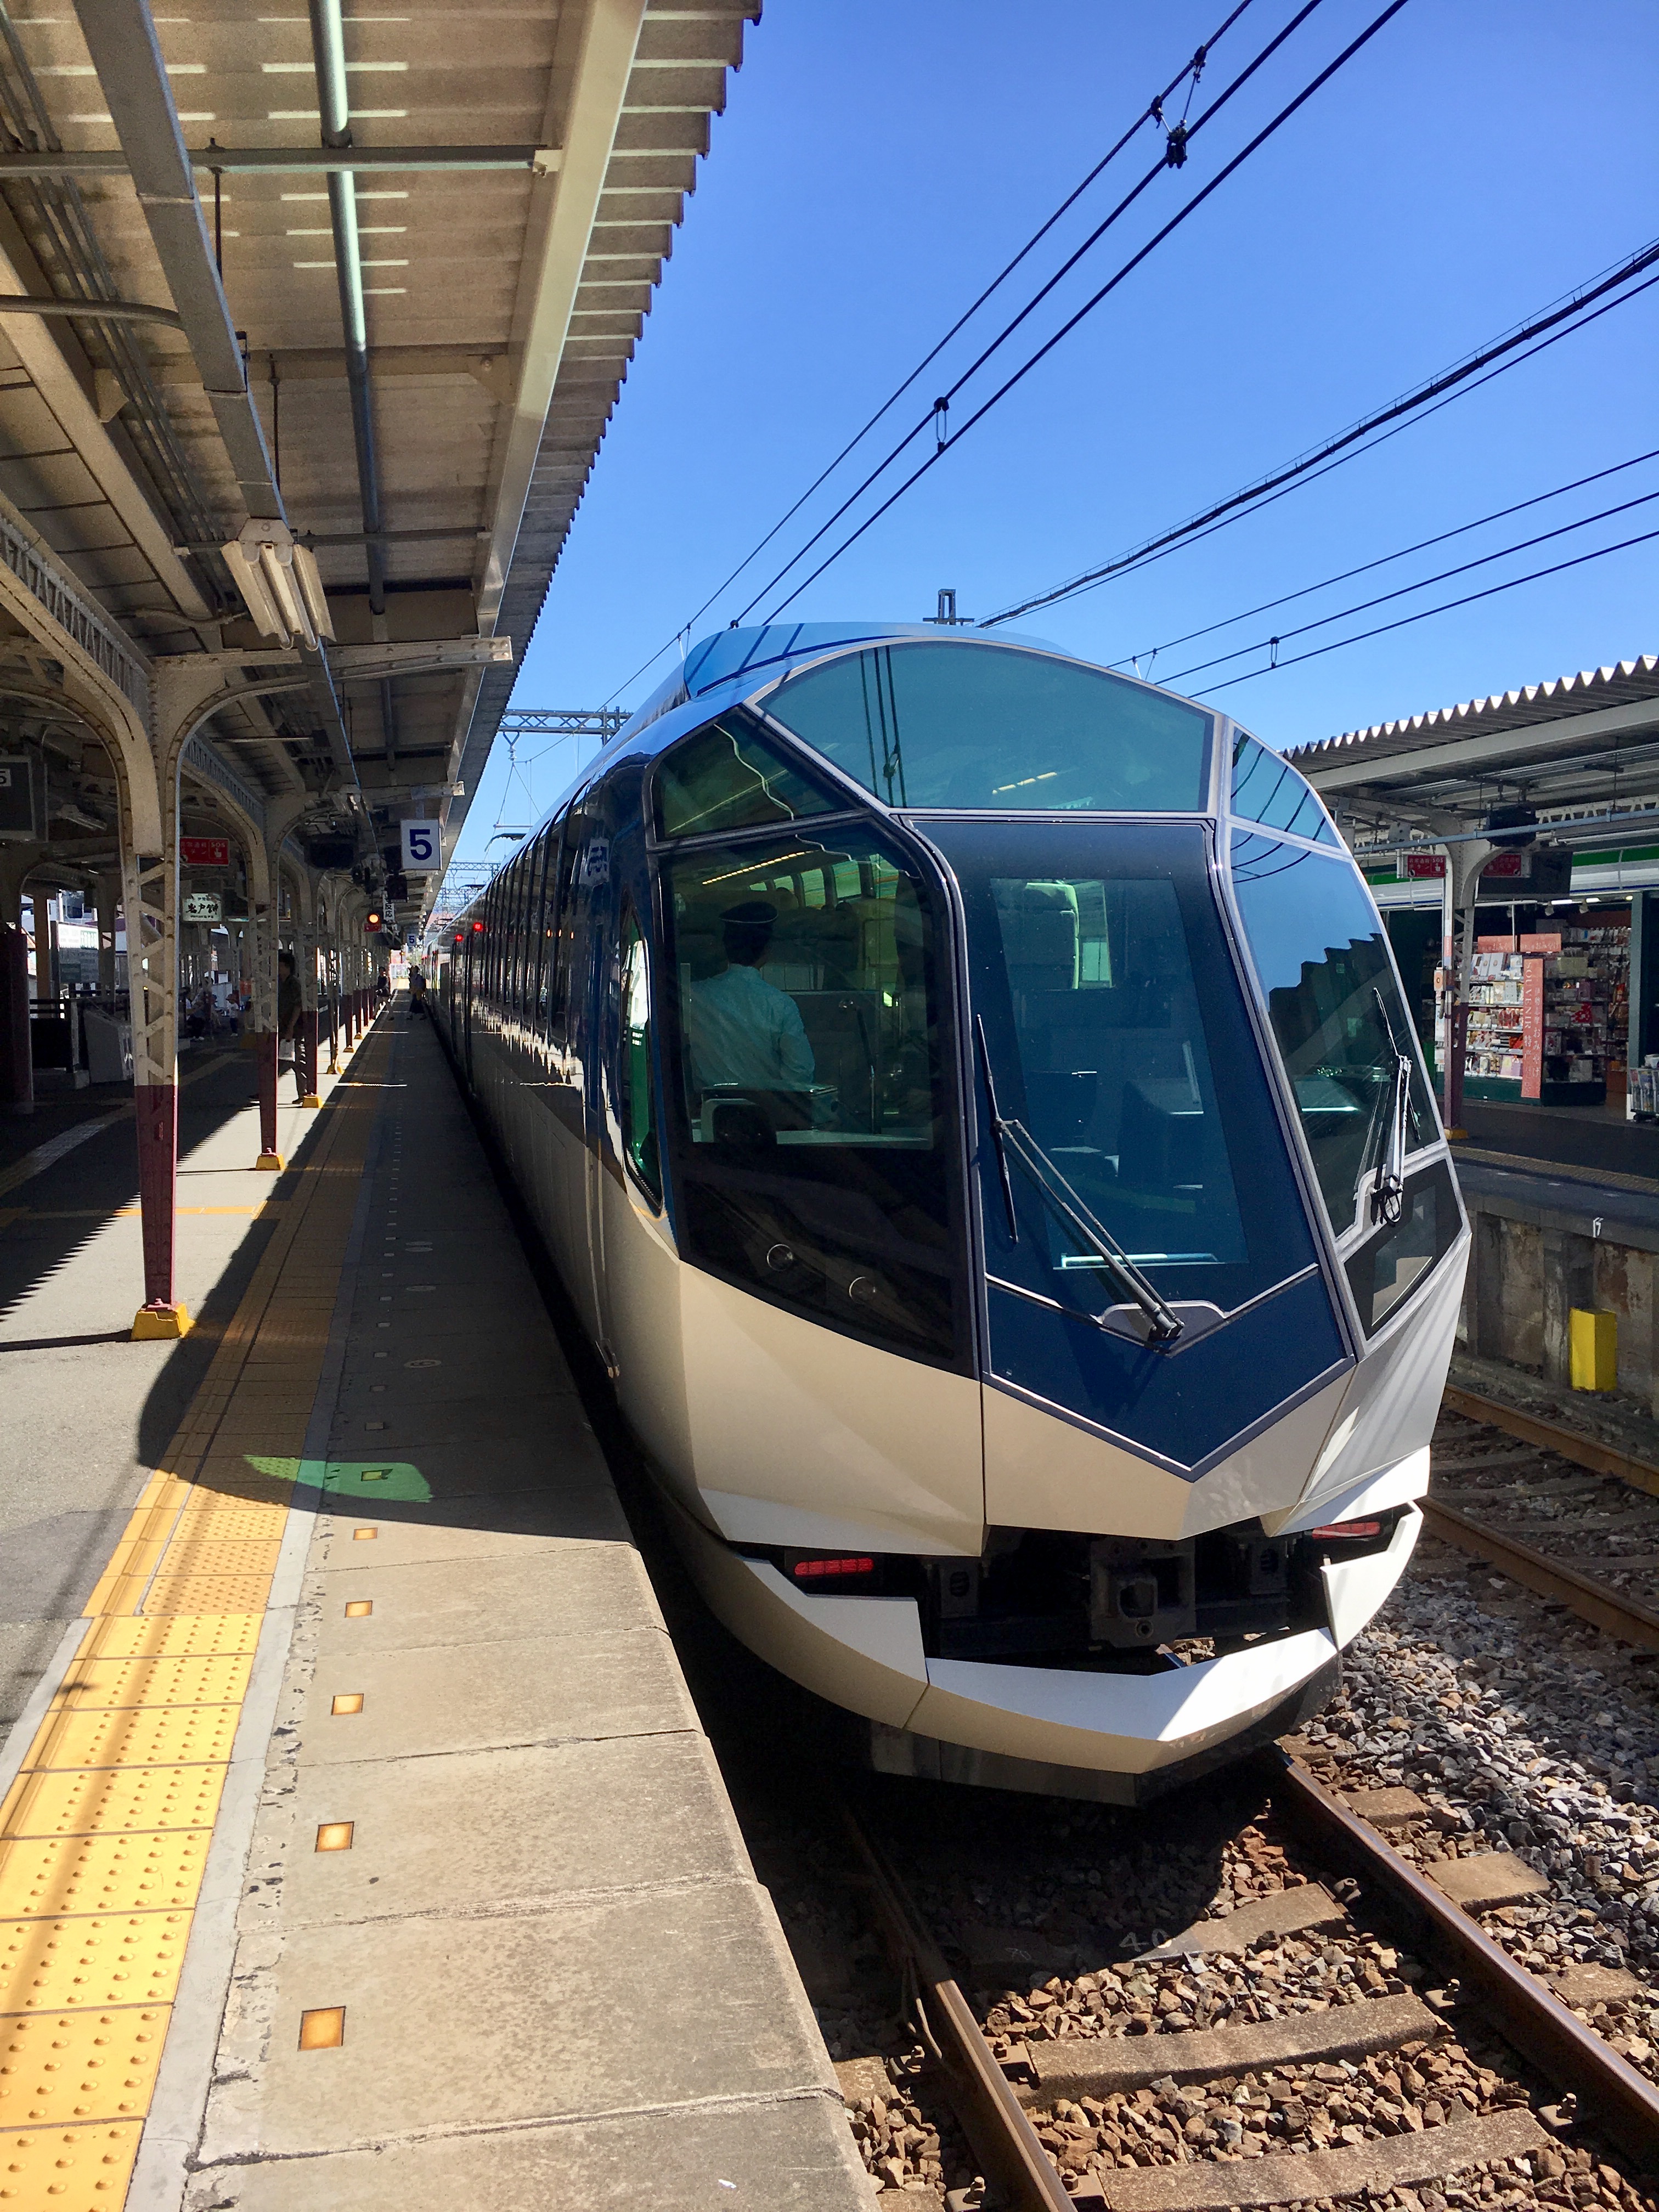 sleek looking train departing station on a clear day